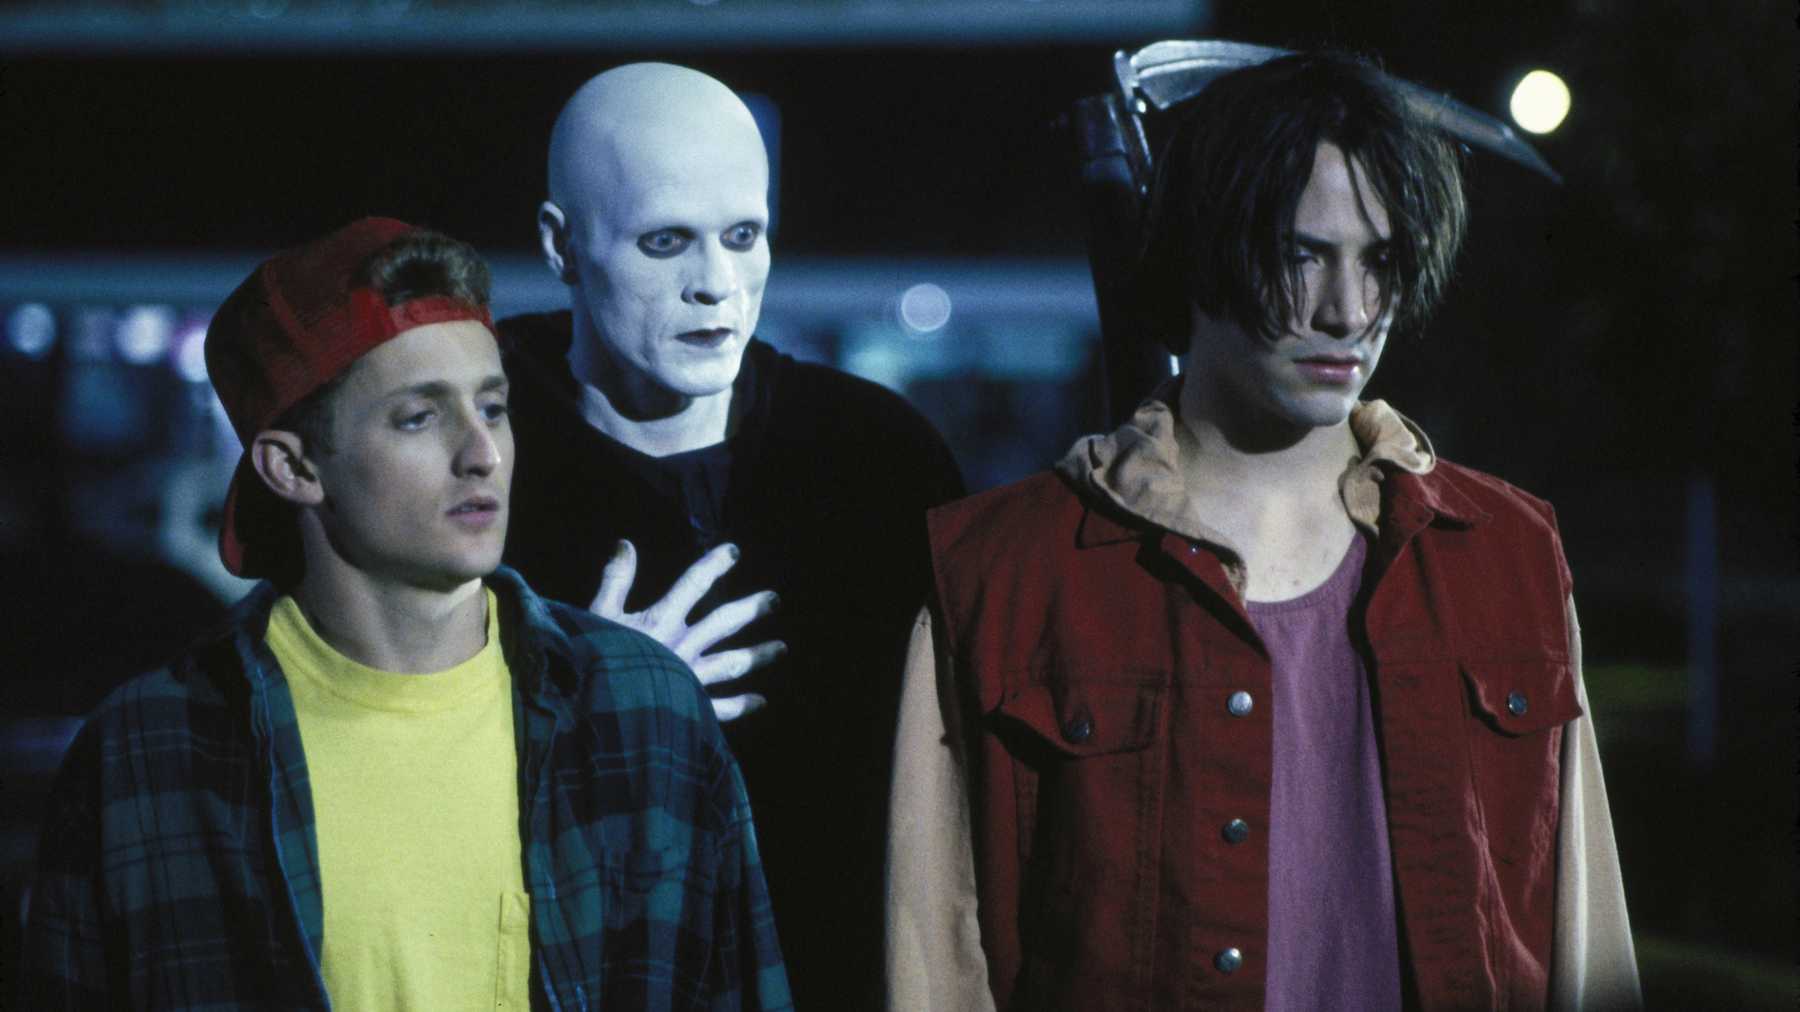 Bill and Ted meet Death. (Photo: Orion Pictures)